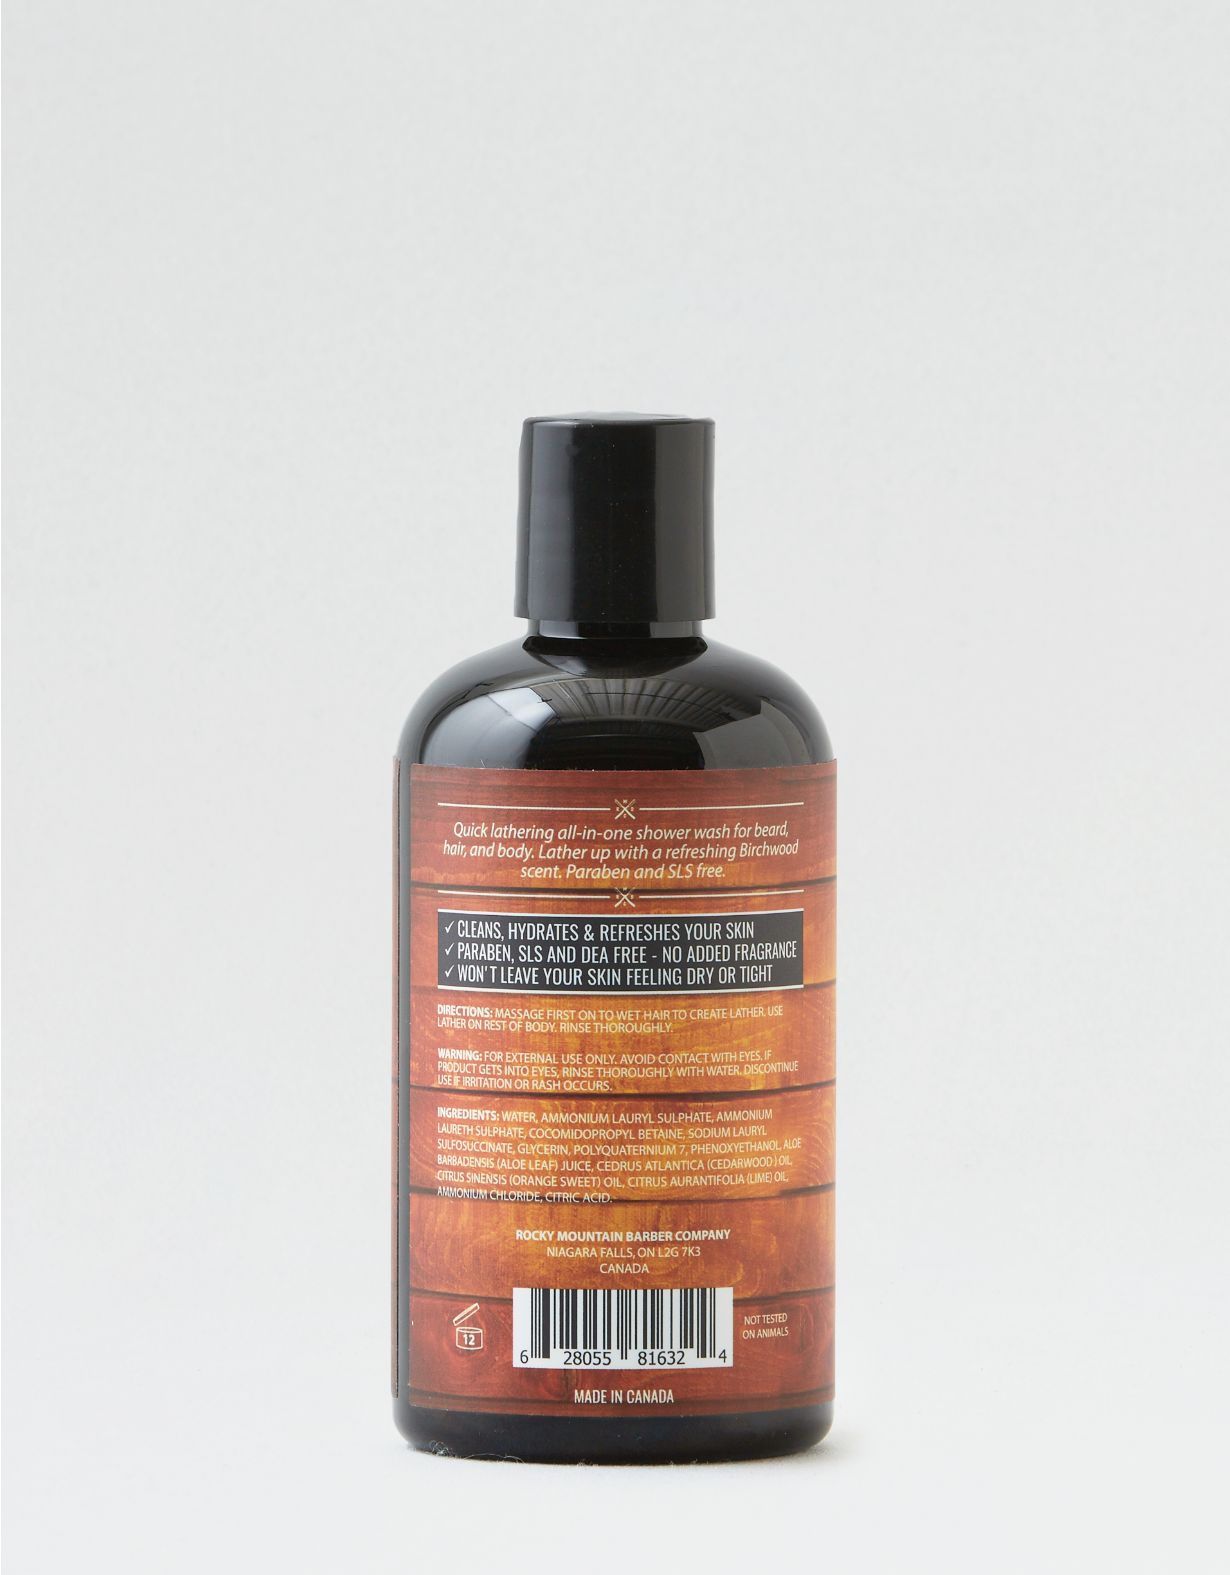 Rocky Mountain Barber Company All-In-One Shower Wash